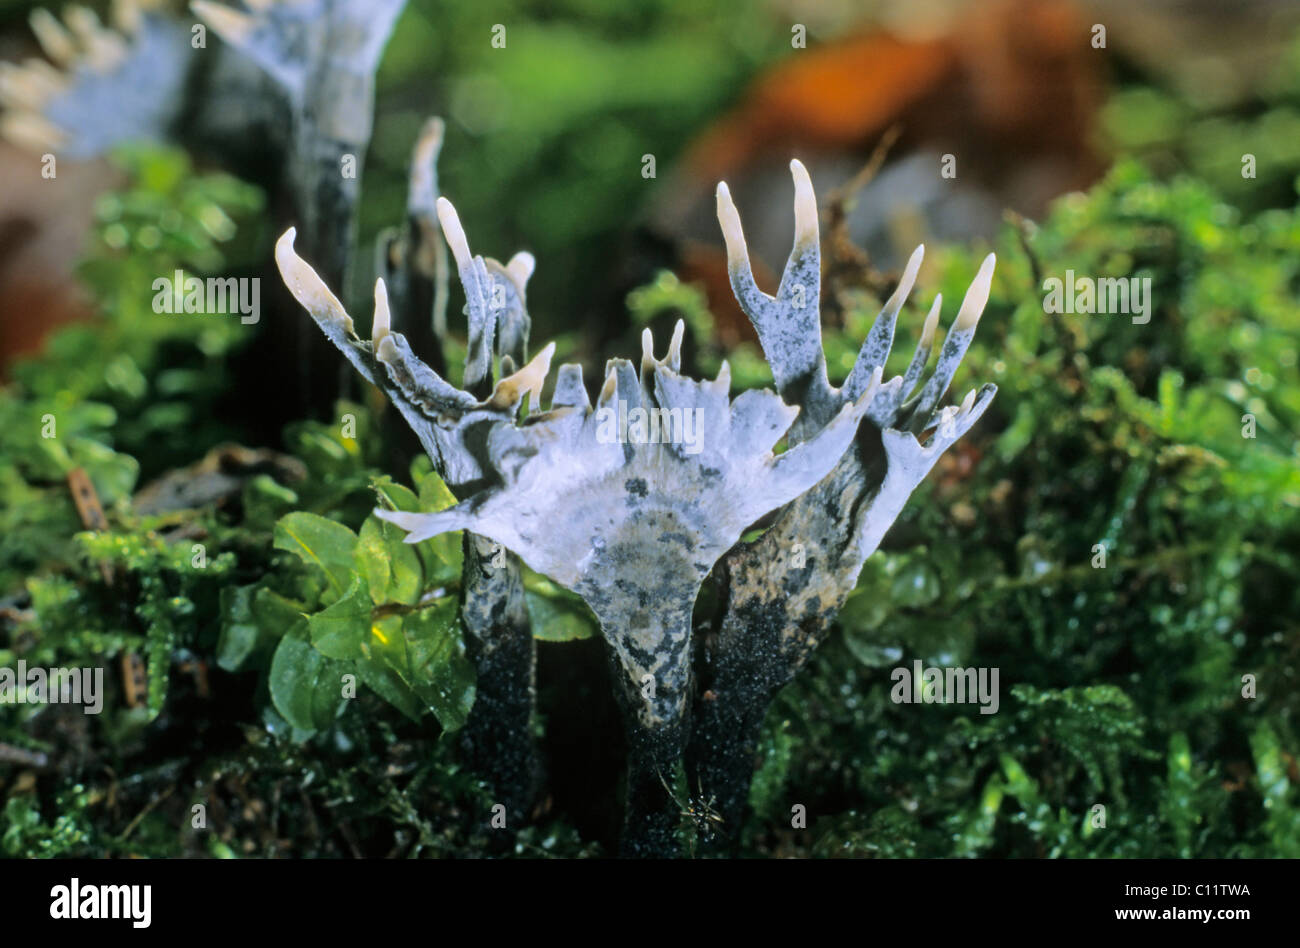 Candlestick fungus, Candlesnuff fungus, Carbon antlers, or Stag's horn fungus (Xylaria hypoxylon) Stock Photo